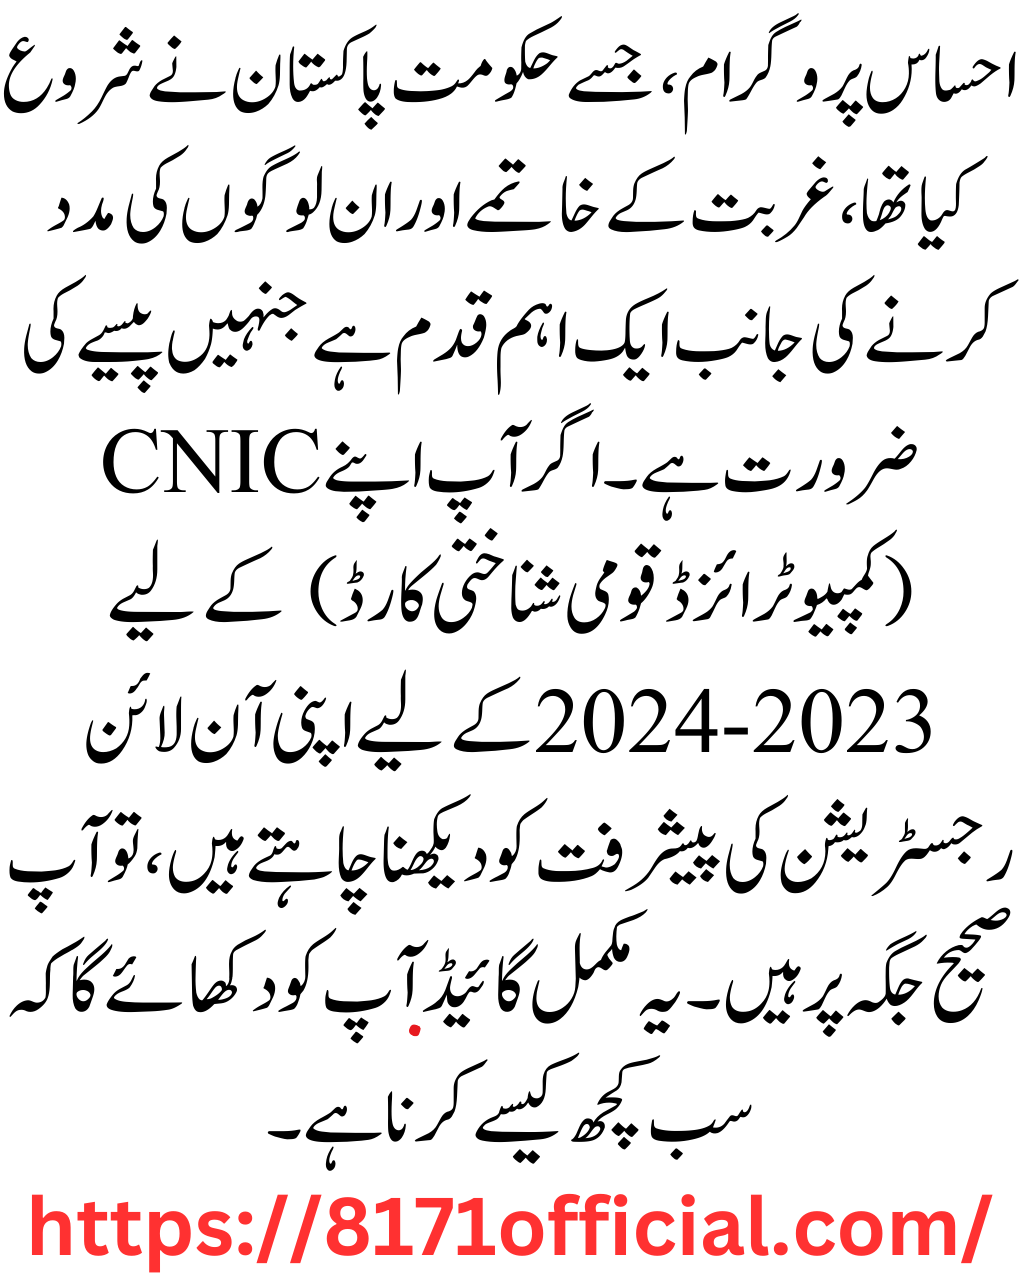 How to Check Your Ehsaas Program CNIC Registration Status Online 2023/2024